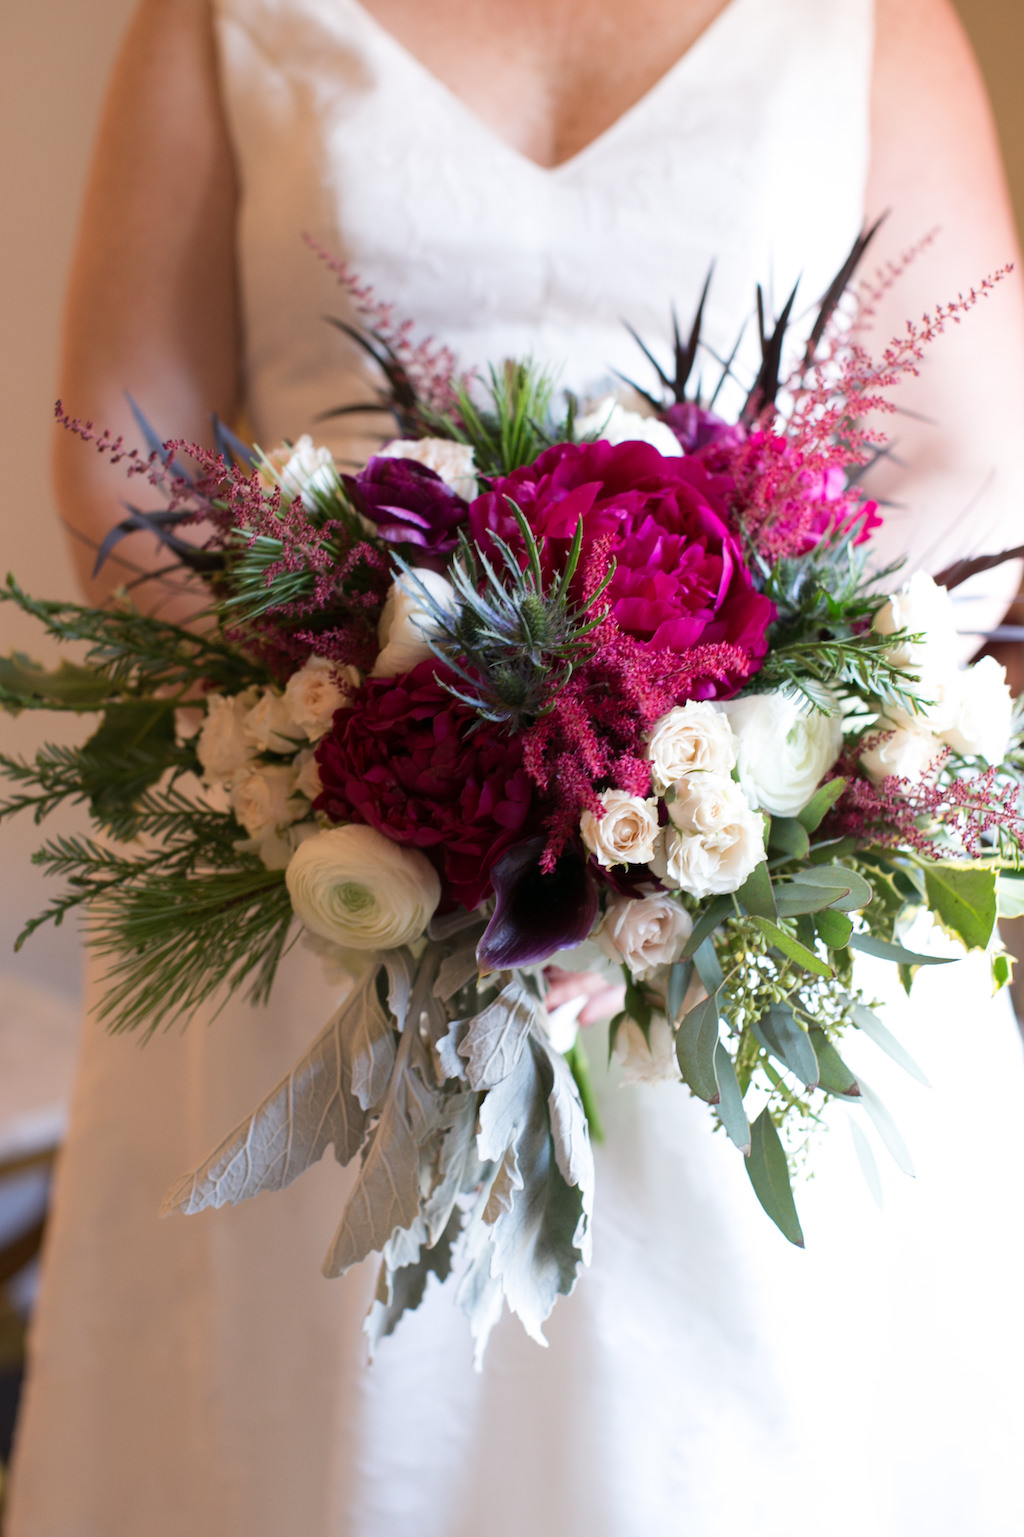 Elegant Whimsical Burgundy, White Roses, Pink Accents, Greenery and Dusty Miller Floral Bridal Bouquet | Tampa Bay Wedding Photographer Carrie Wildes Photography